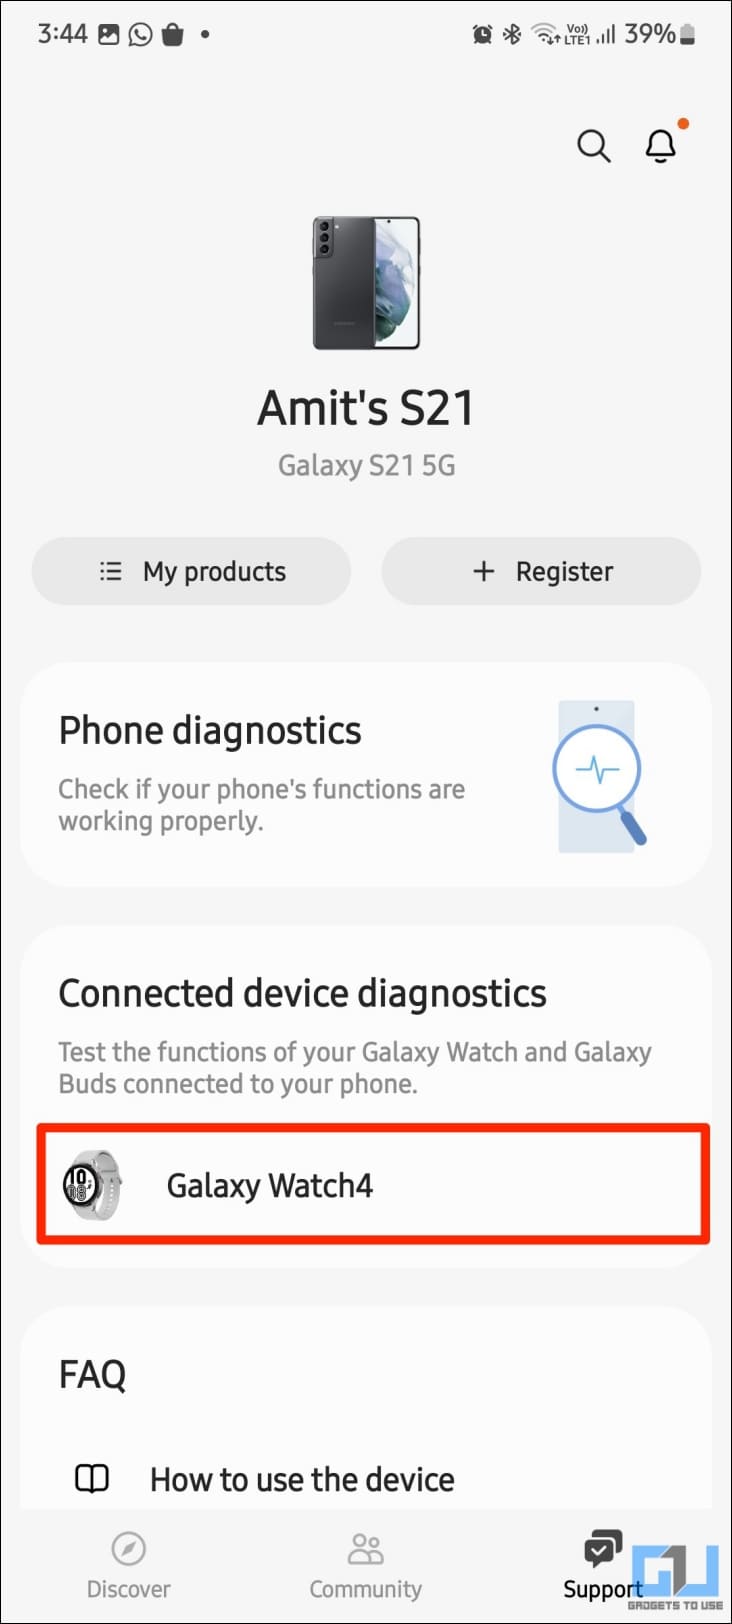 Tap your Galaxy Watch under Connected device